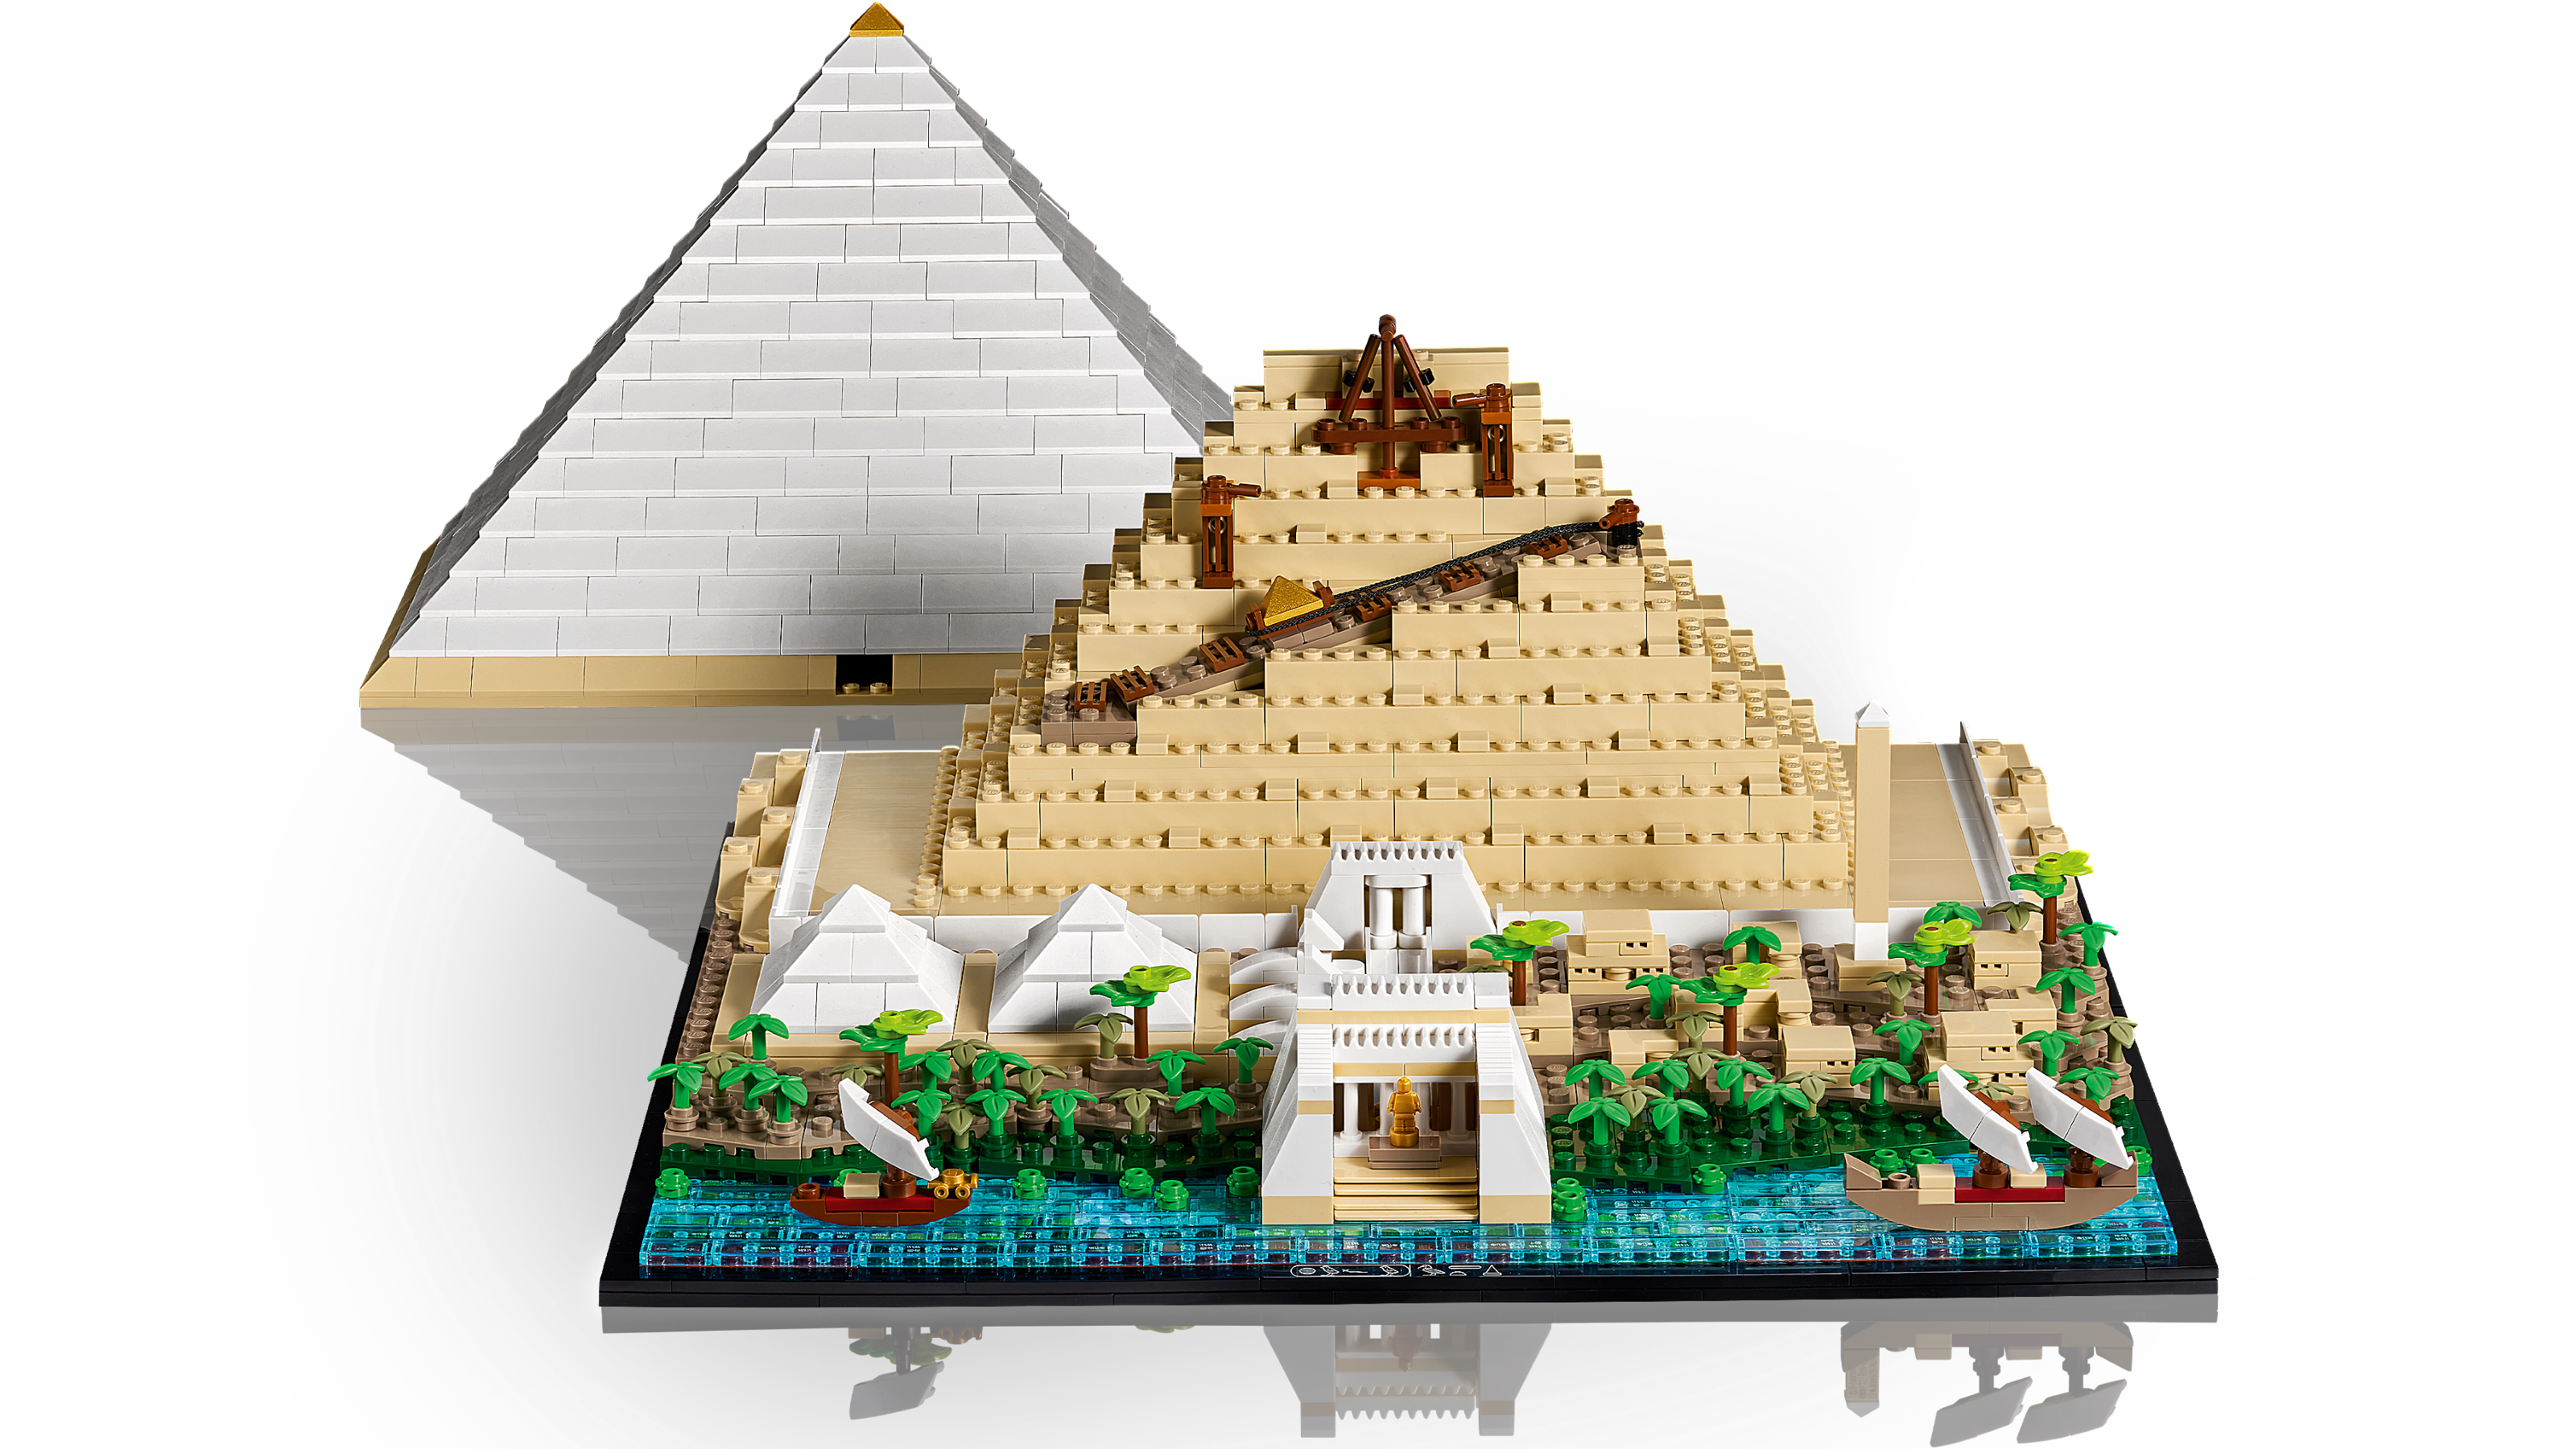 the | LEGO® Official Giza Pyramid of Buy Shop Great online 21058 at Architecture US |